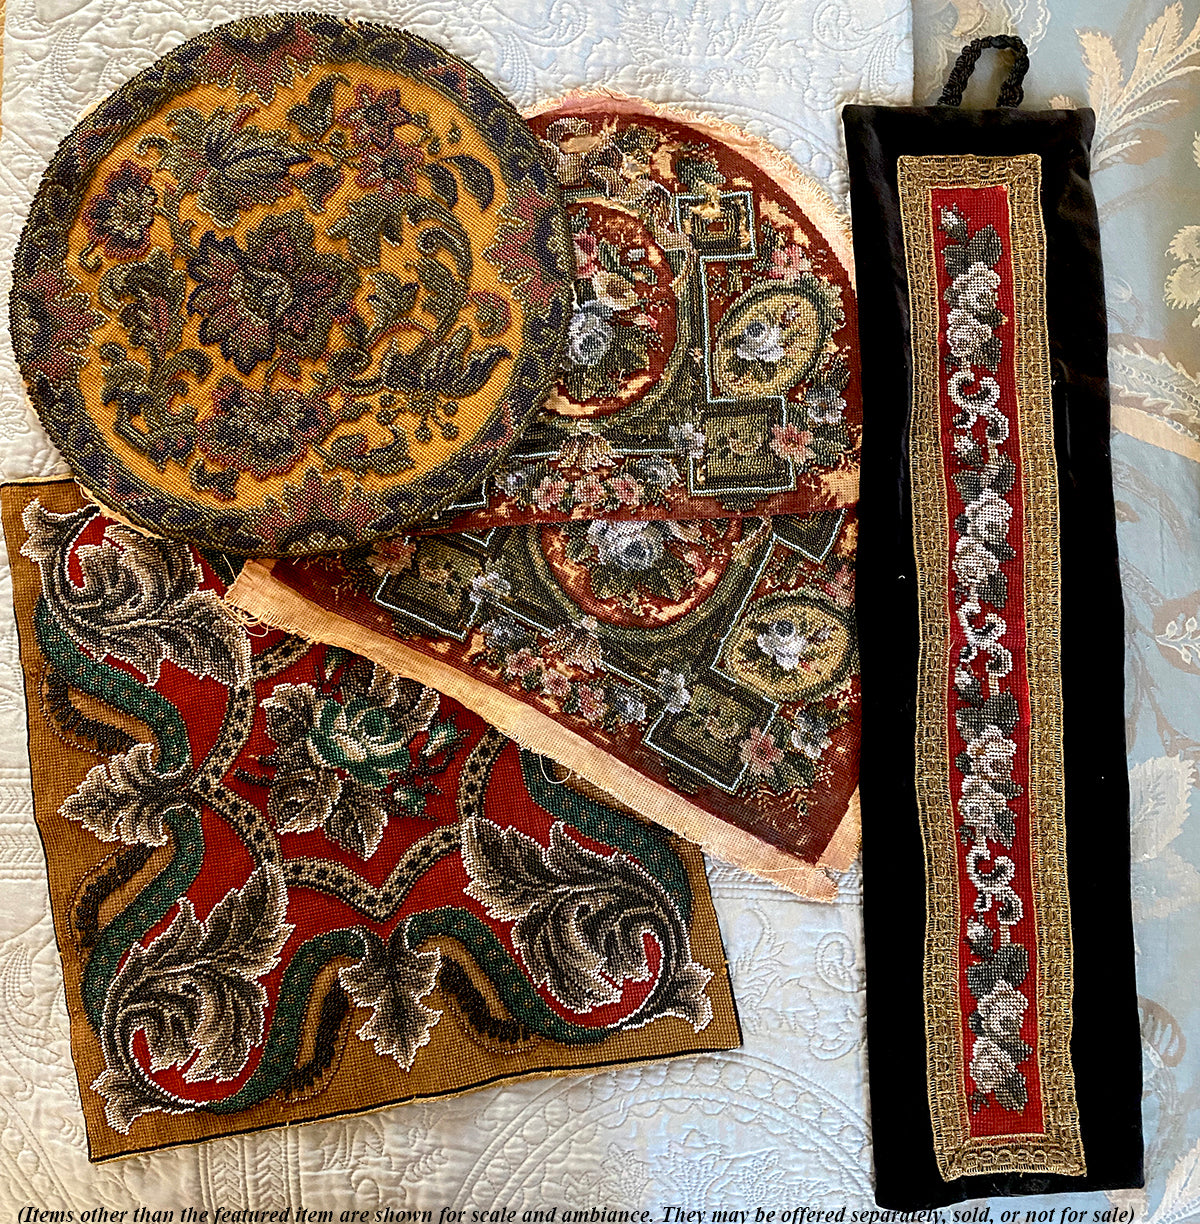 Unused 14" Diam Antiuqe Victorian Glass Beadwork Tapestry Panel, Beaded Needlepoint for Pillow